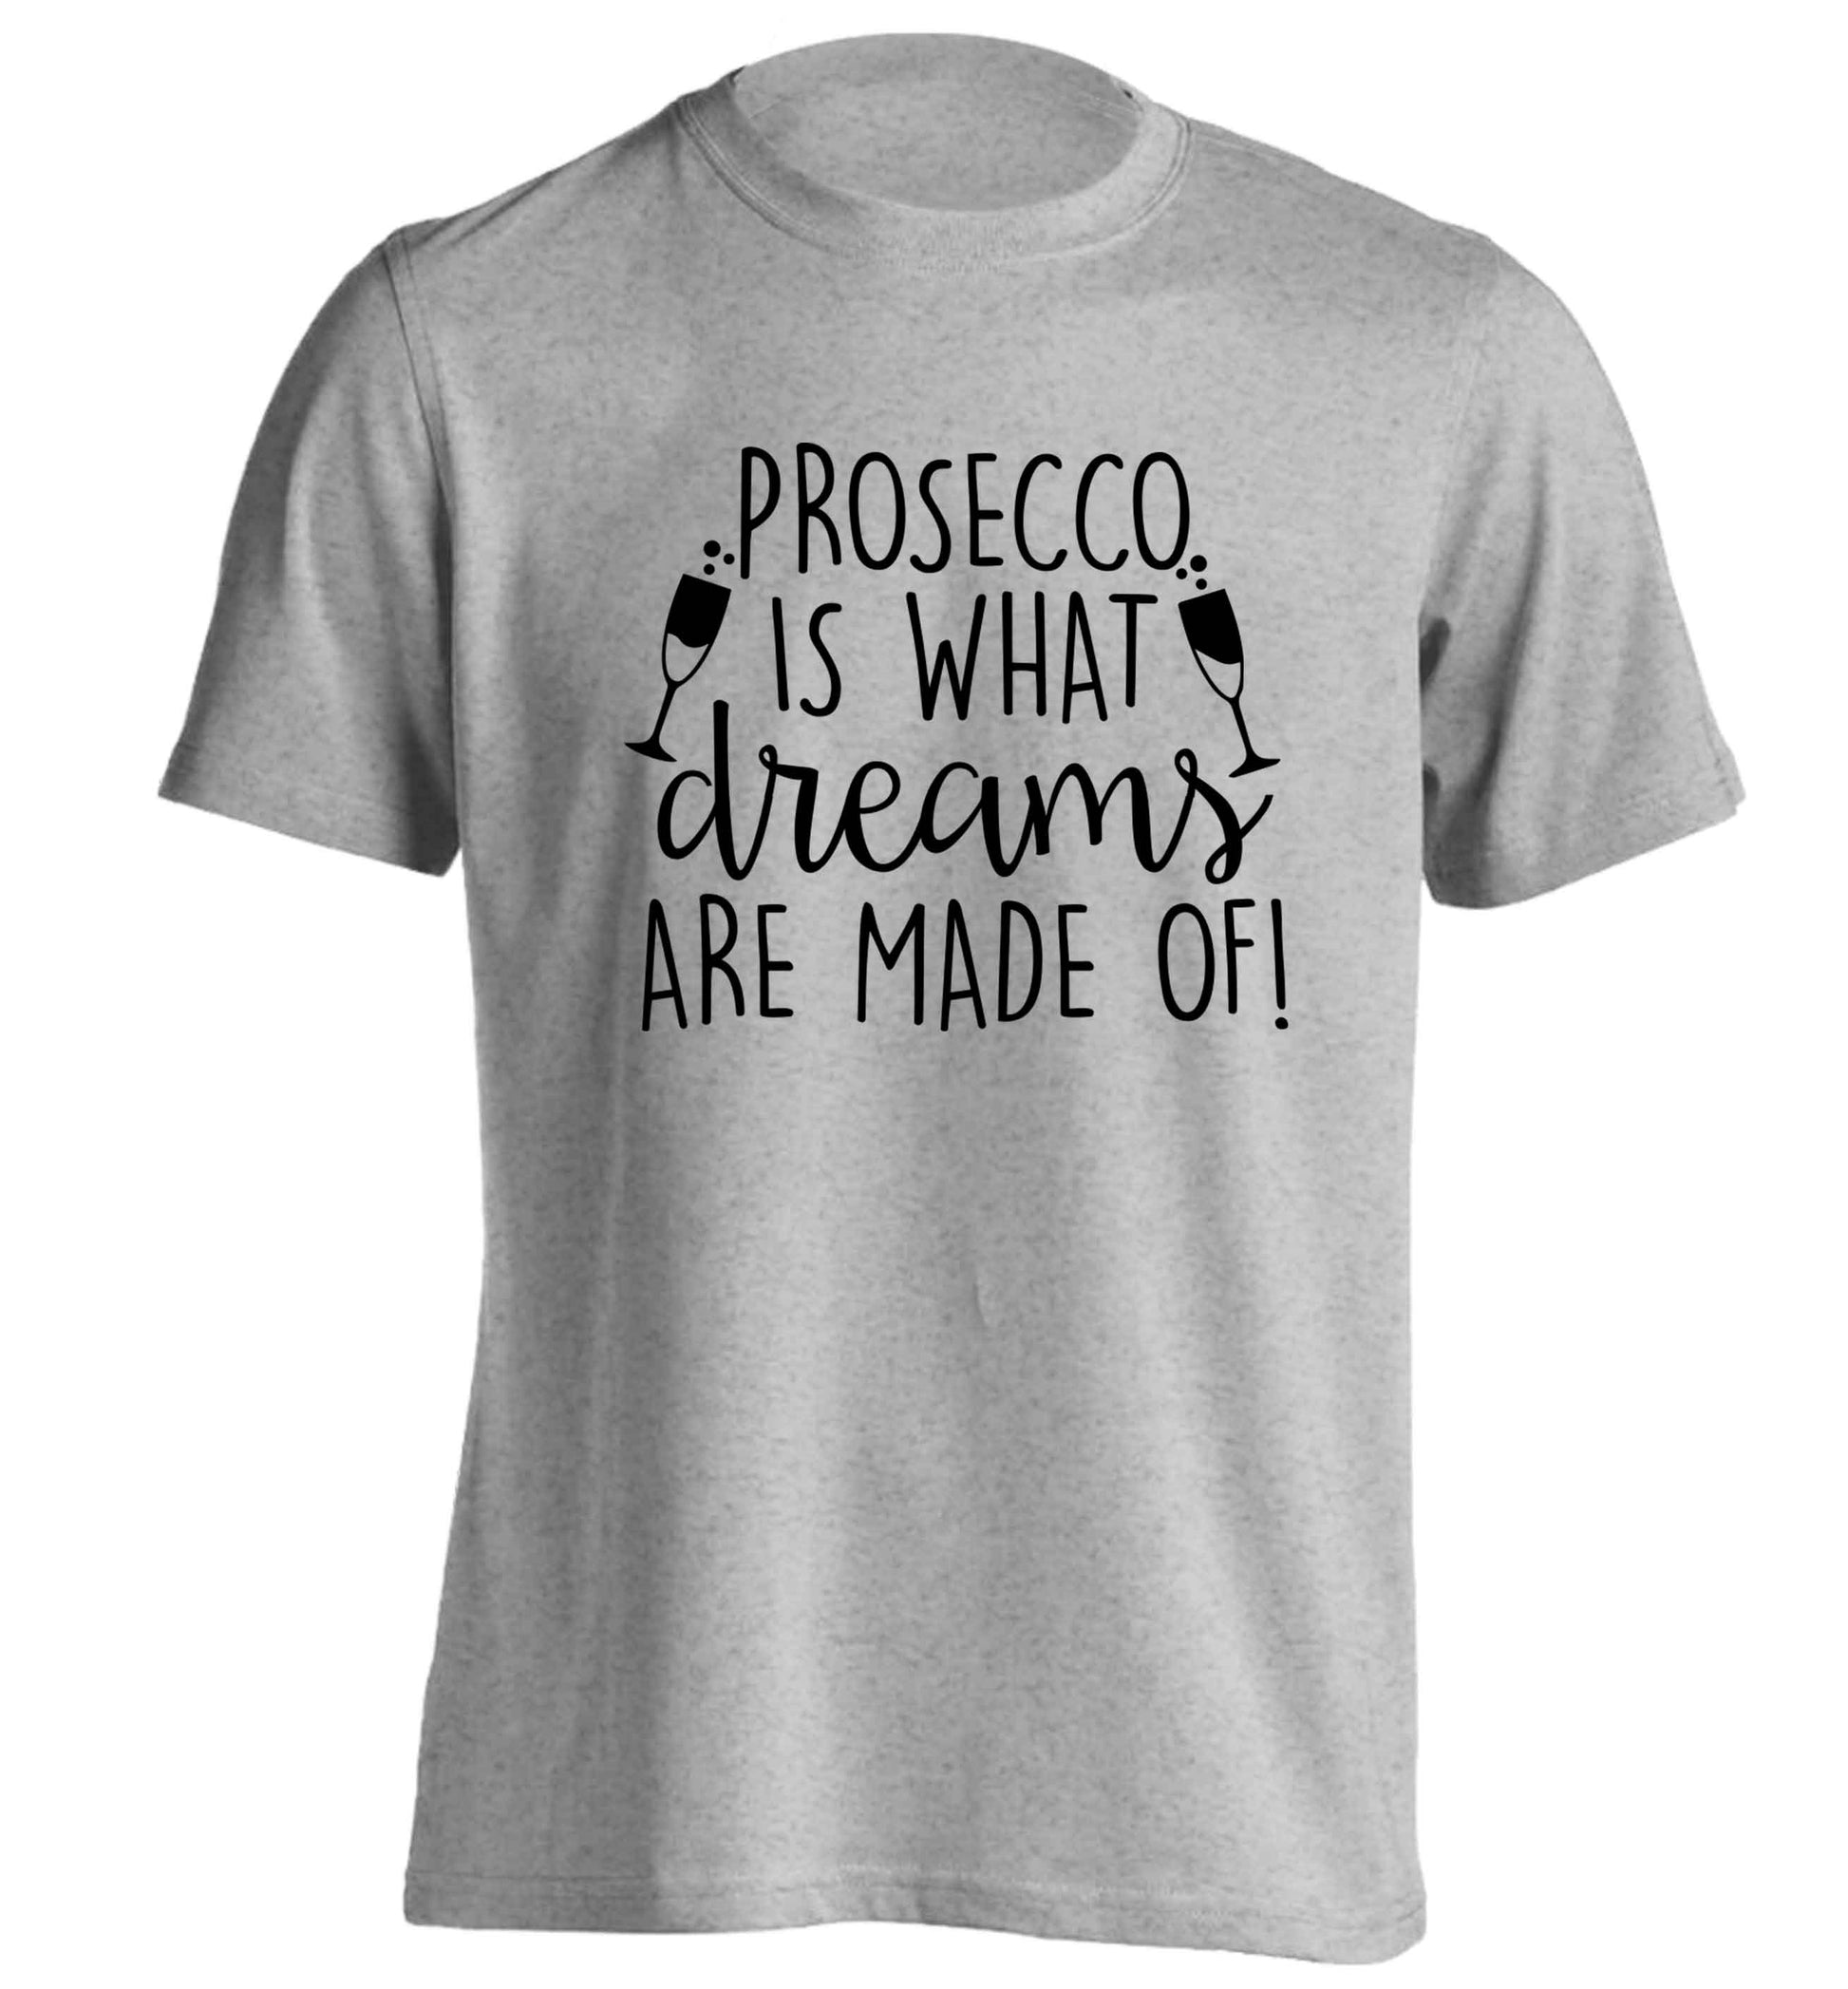 Prosecco is what dreams are made of adults unisex grey Tshirt 2XL